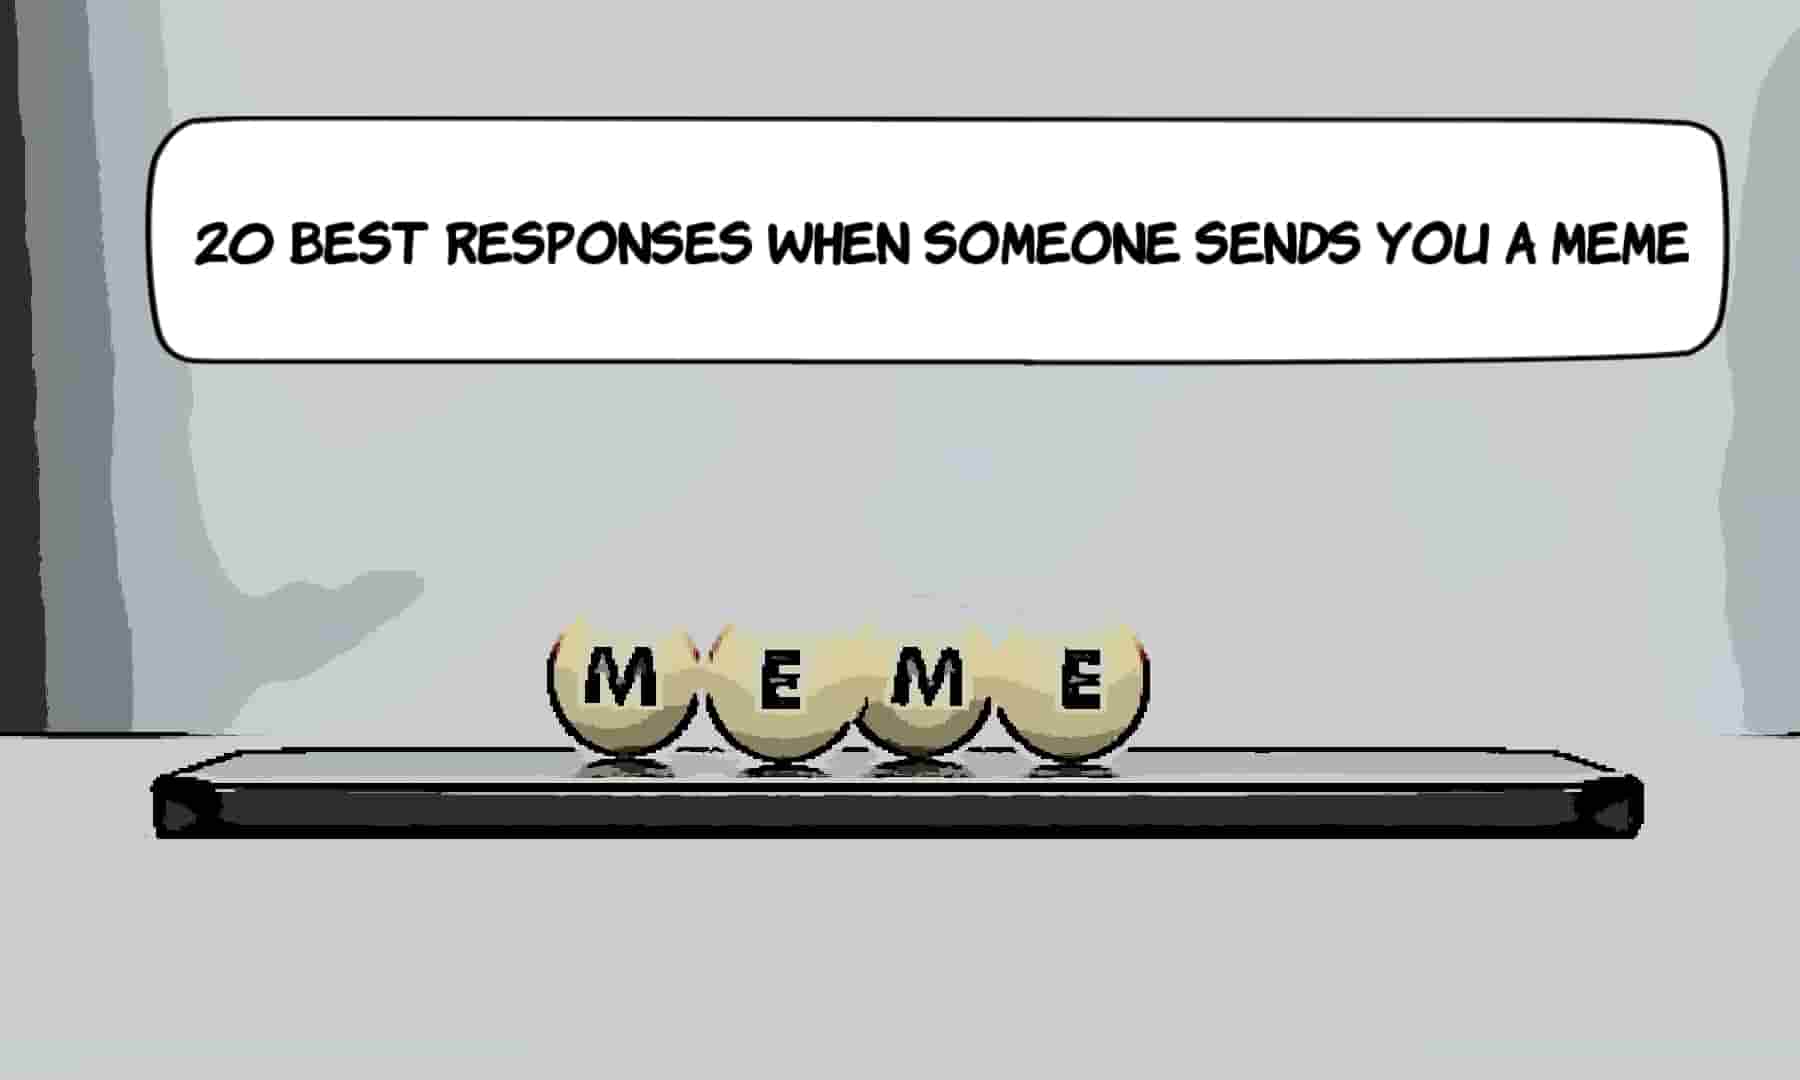 Best Responses When Someone Sends You a Meme